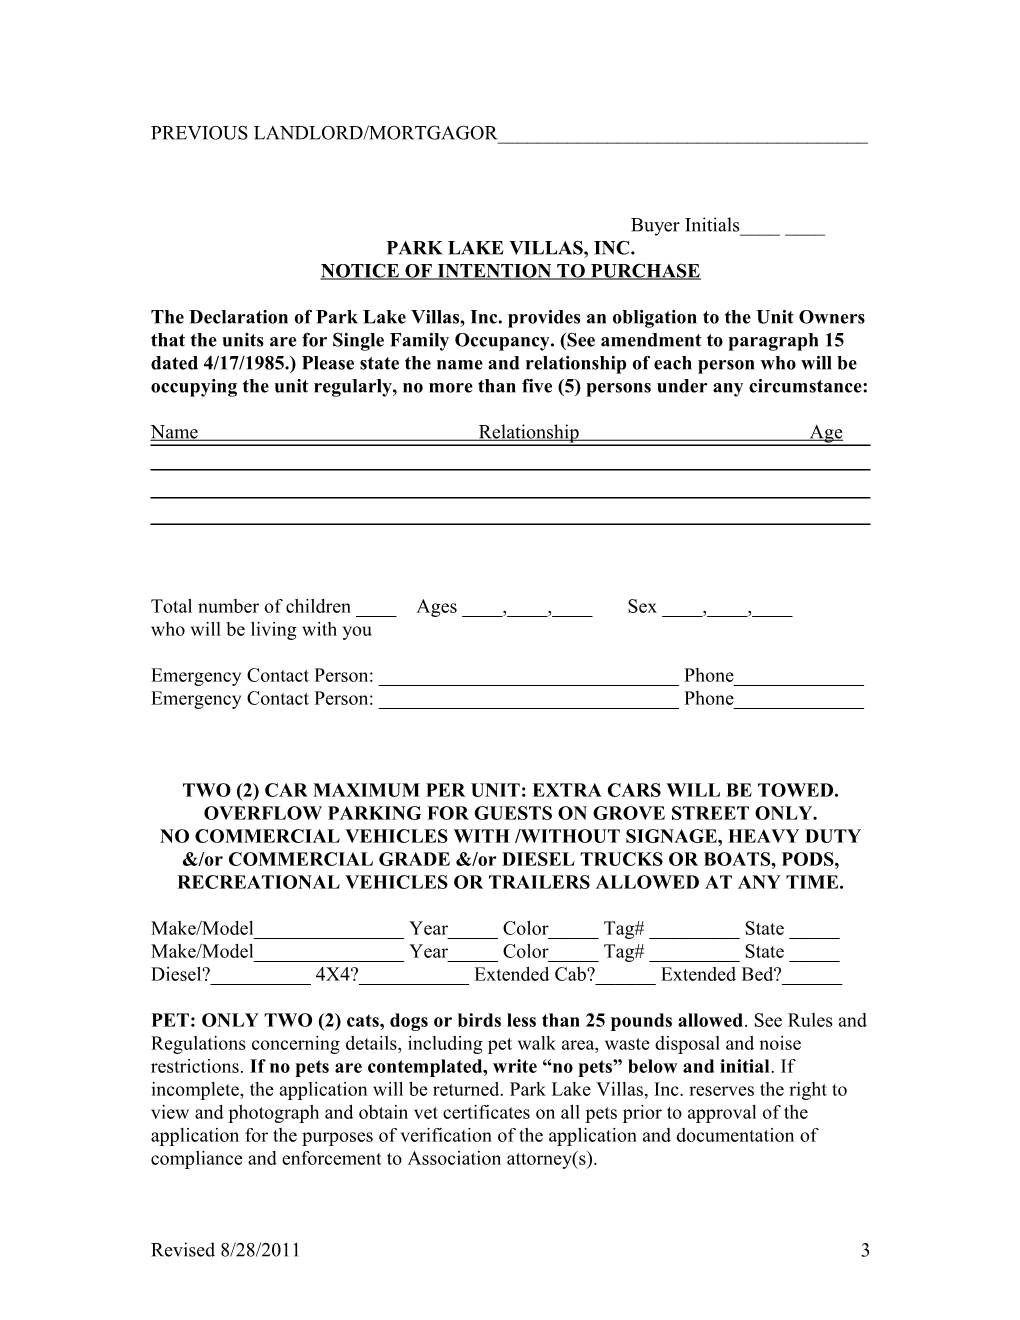 An Executed Copy of Sale/Purchase Contract and Non-Refundable Application Fee of $100